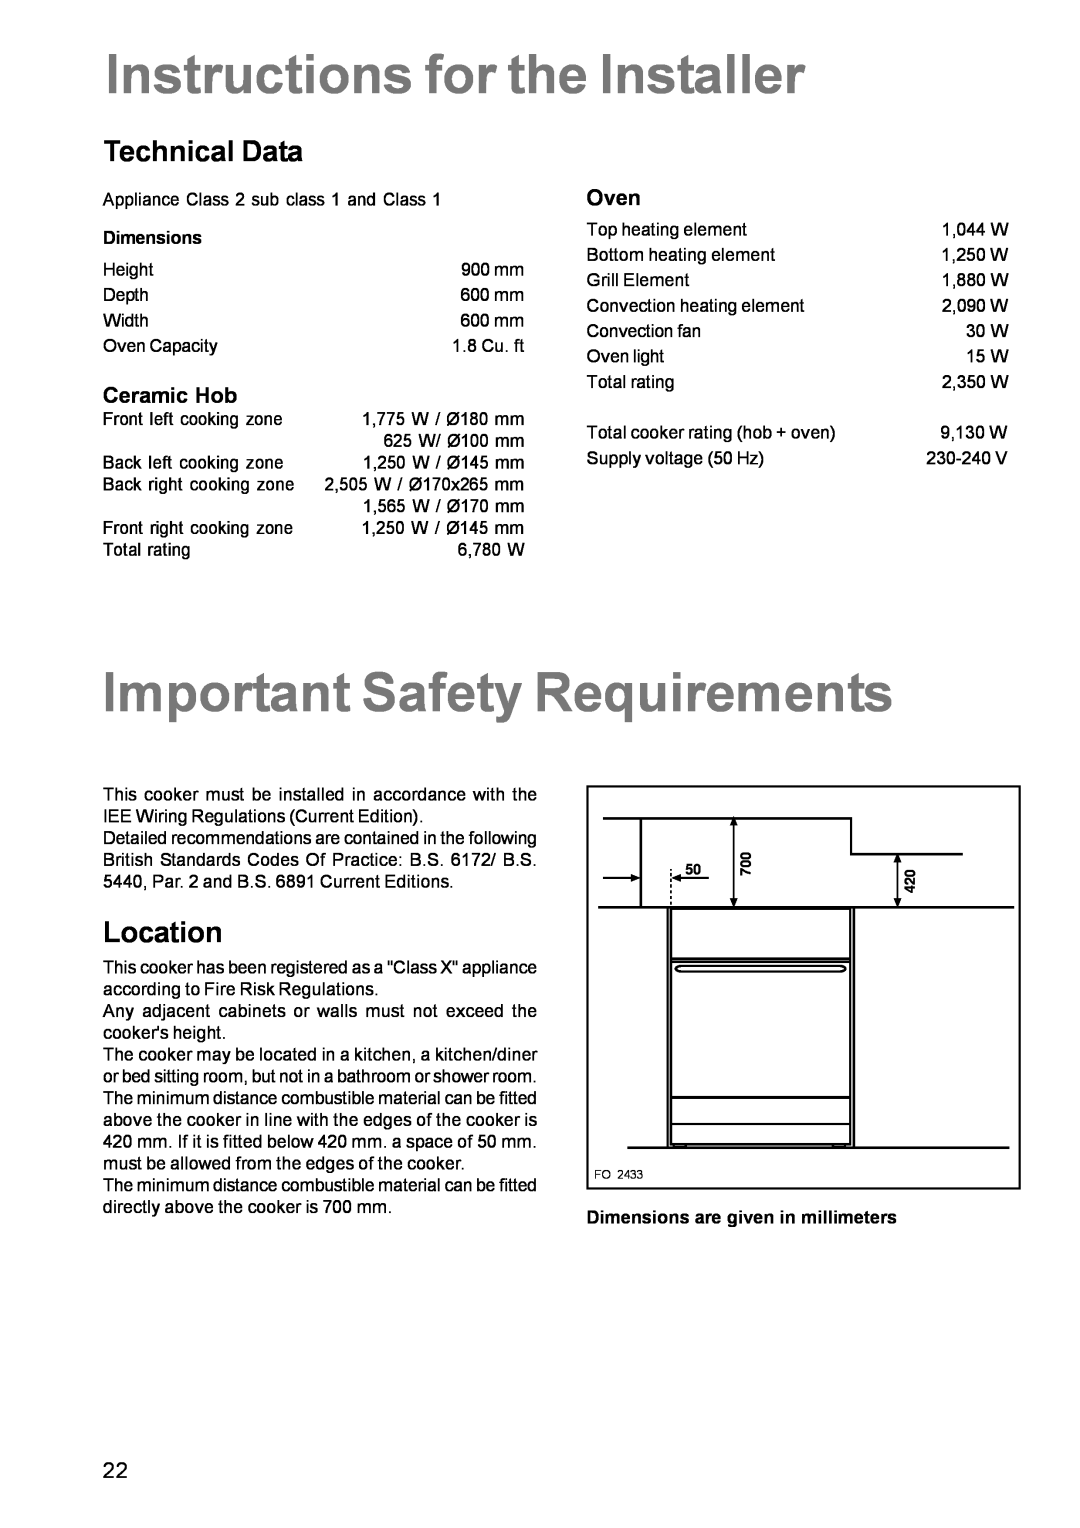 Zanussi ZCE 630 Instructions for the Installer, Important Safety Requirements, Technical Data, Location, Oven, Ceramic Hob 